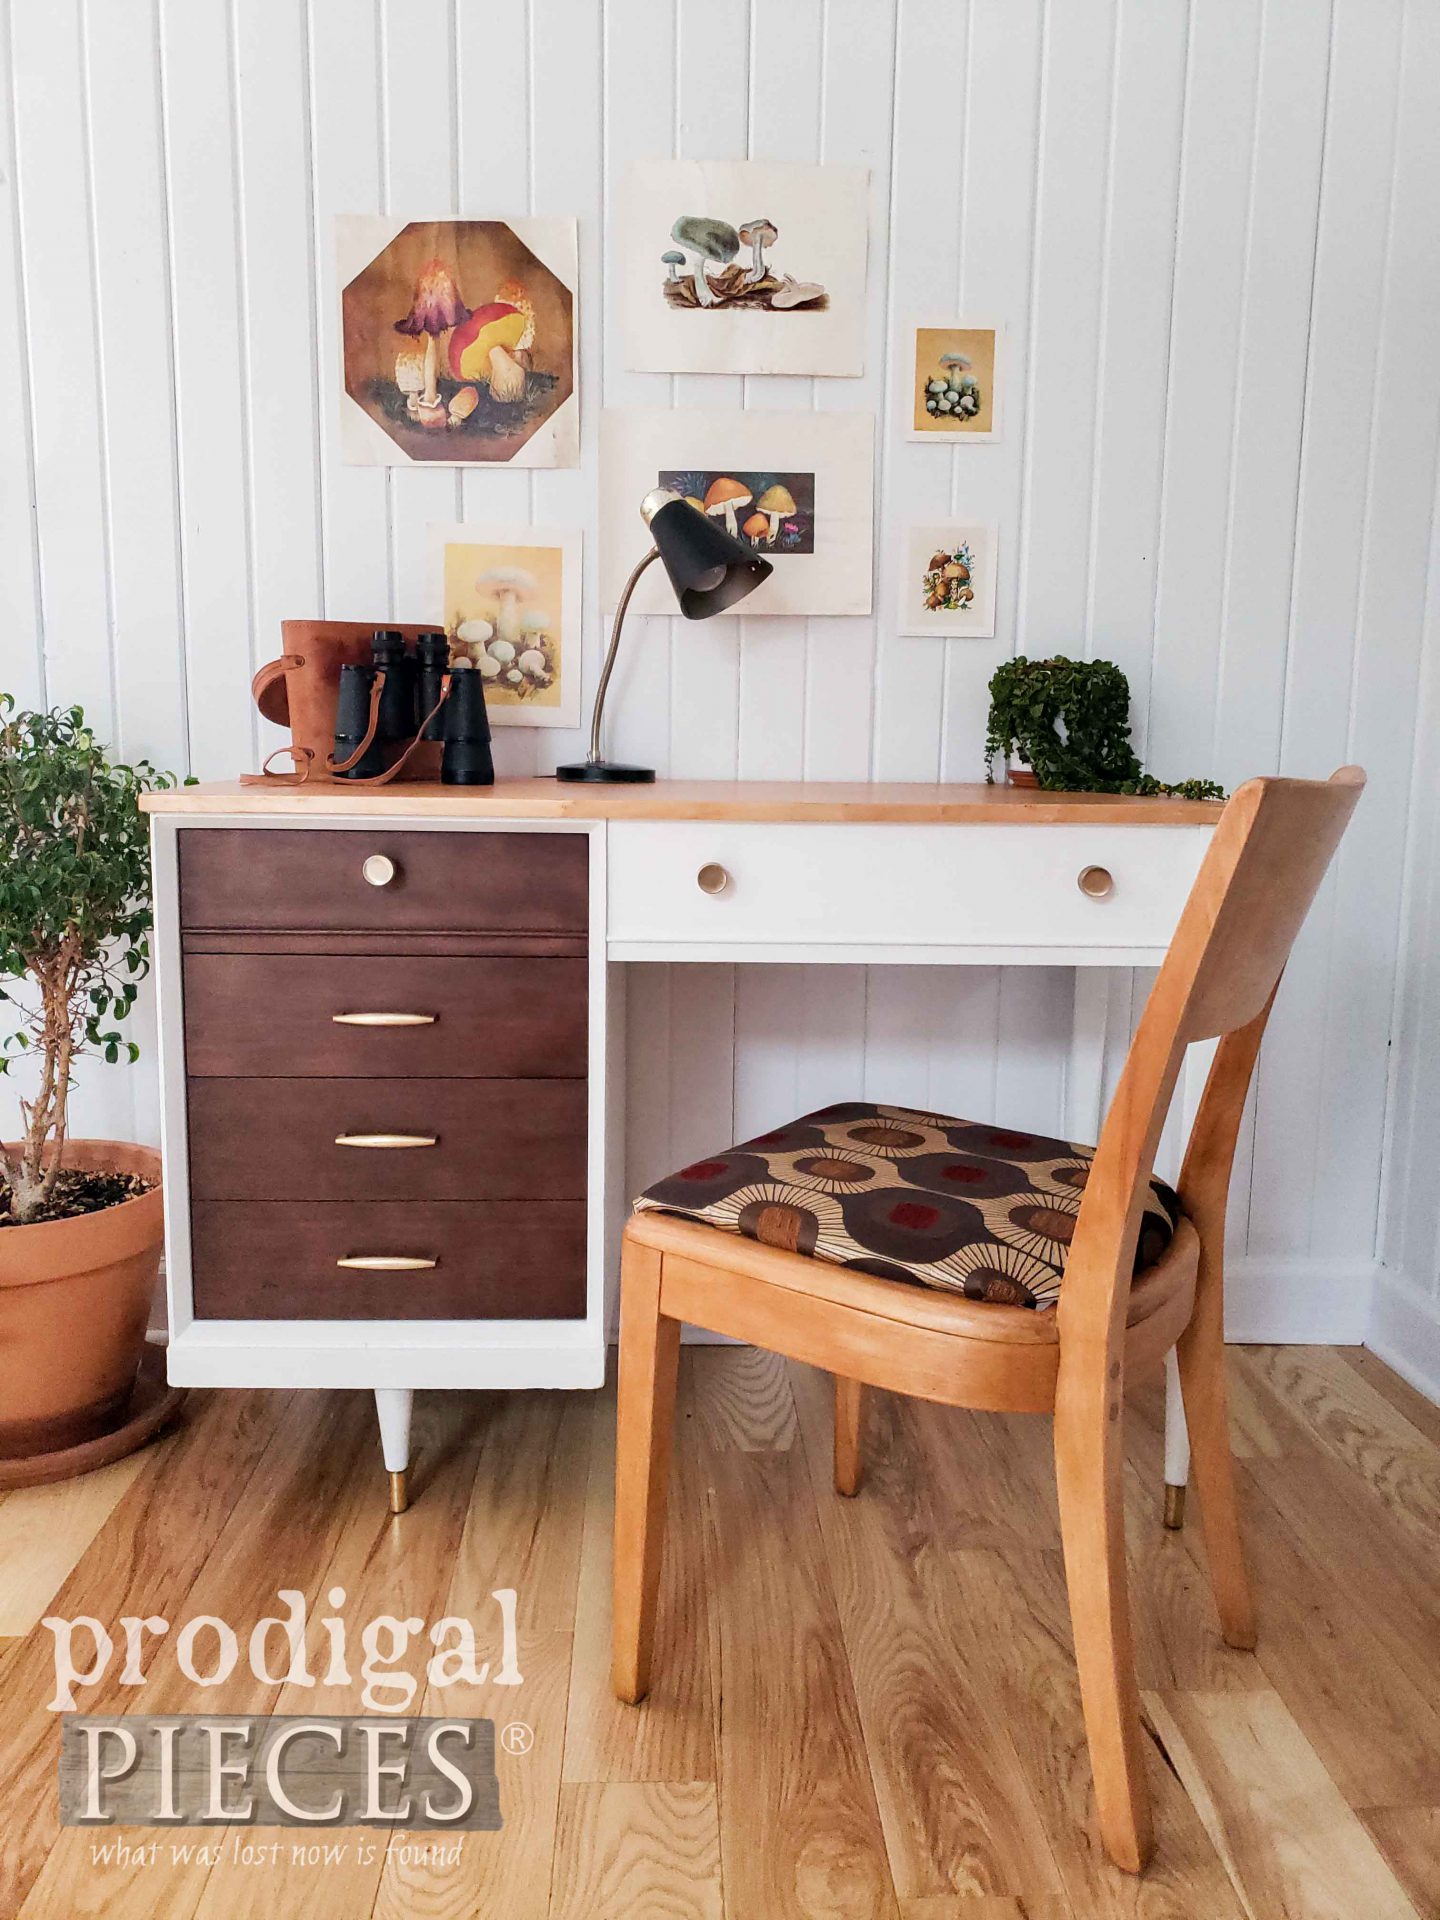 Upcycled Sewing Desk into Mid Century Modern Desk Set by Larissa of Prodigal Pieces | prodigalpieces.com #prodigalpieces #diy #furniture #midcentury #modern #home #homedecor #vintage